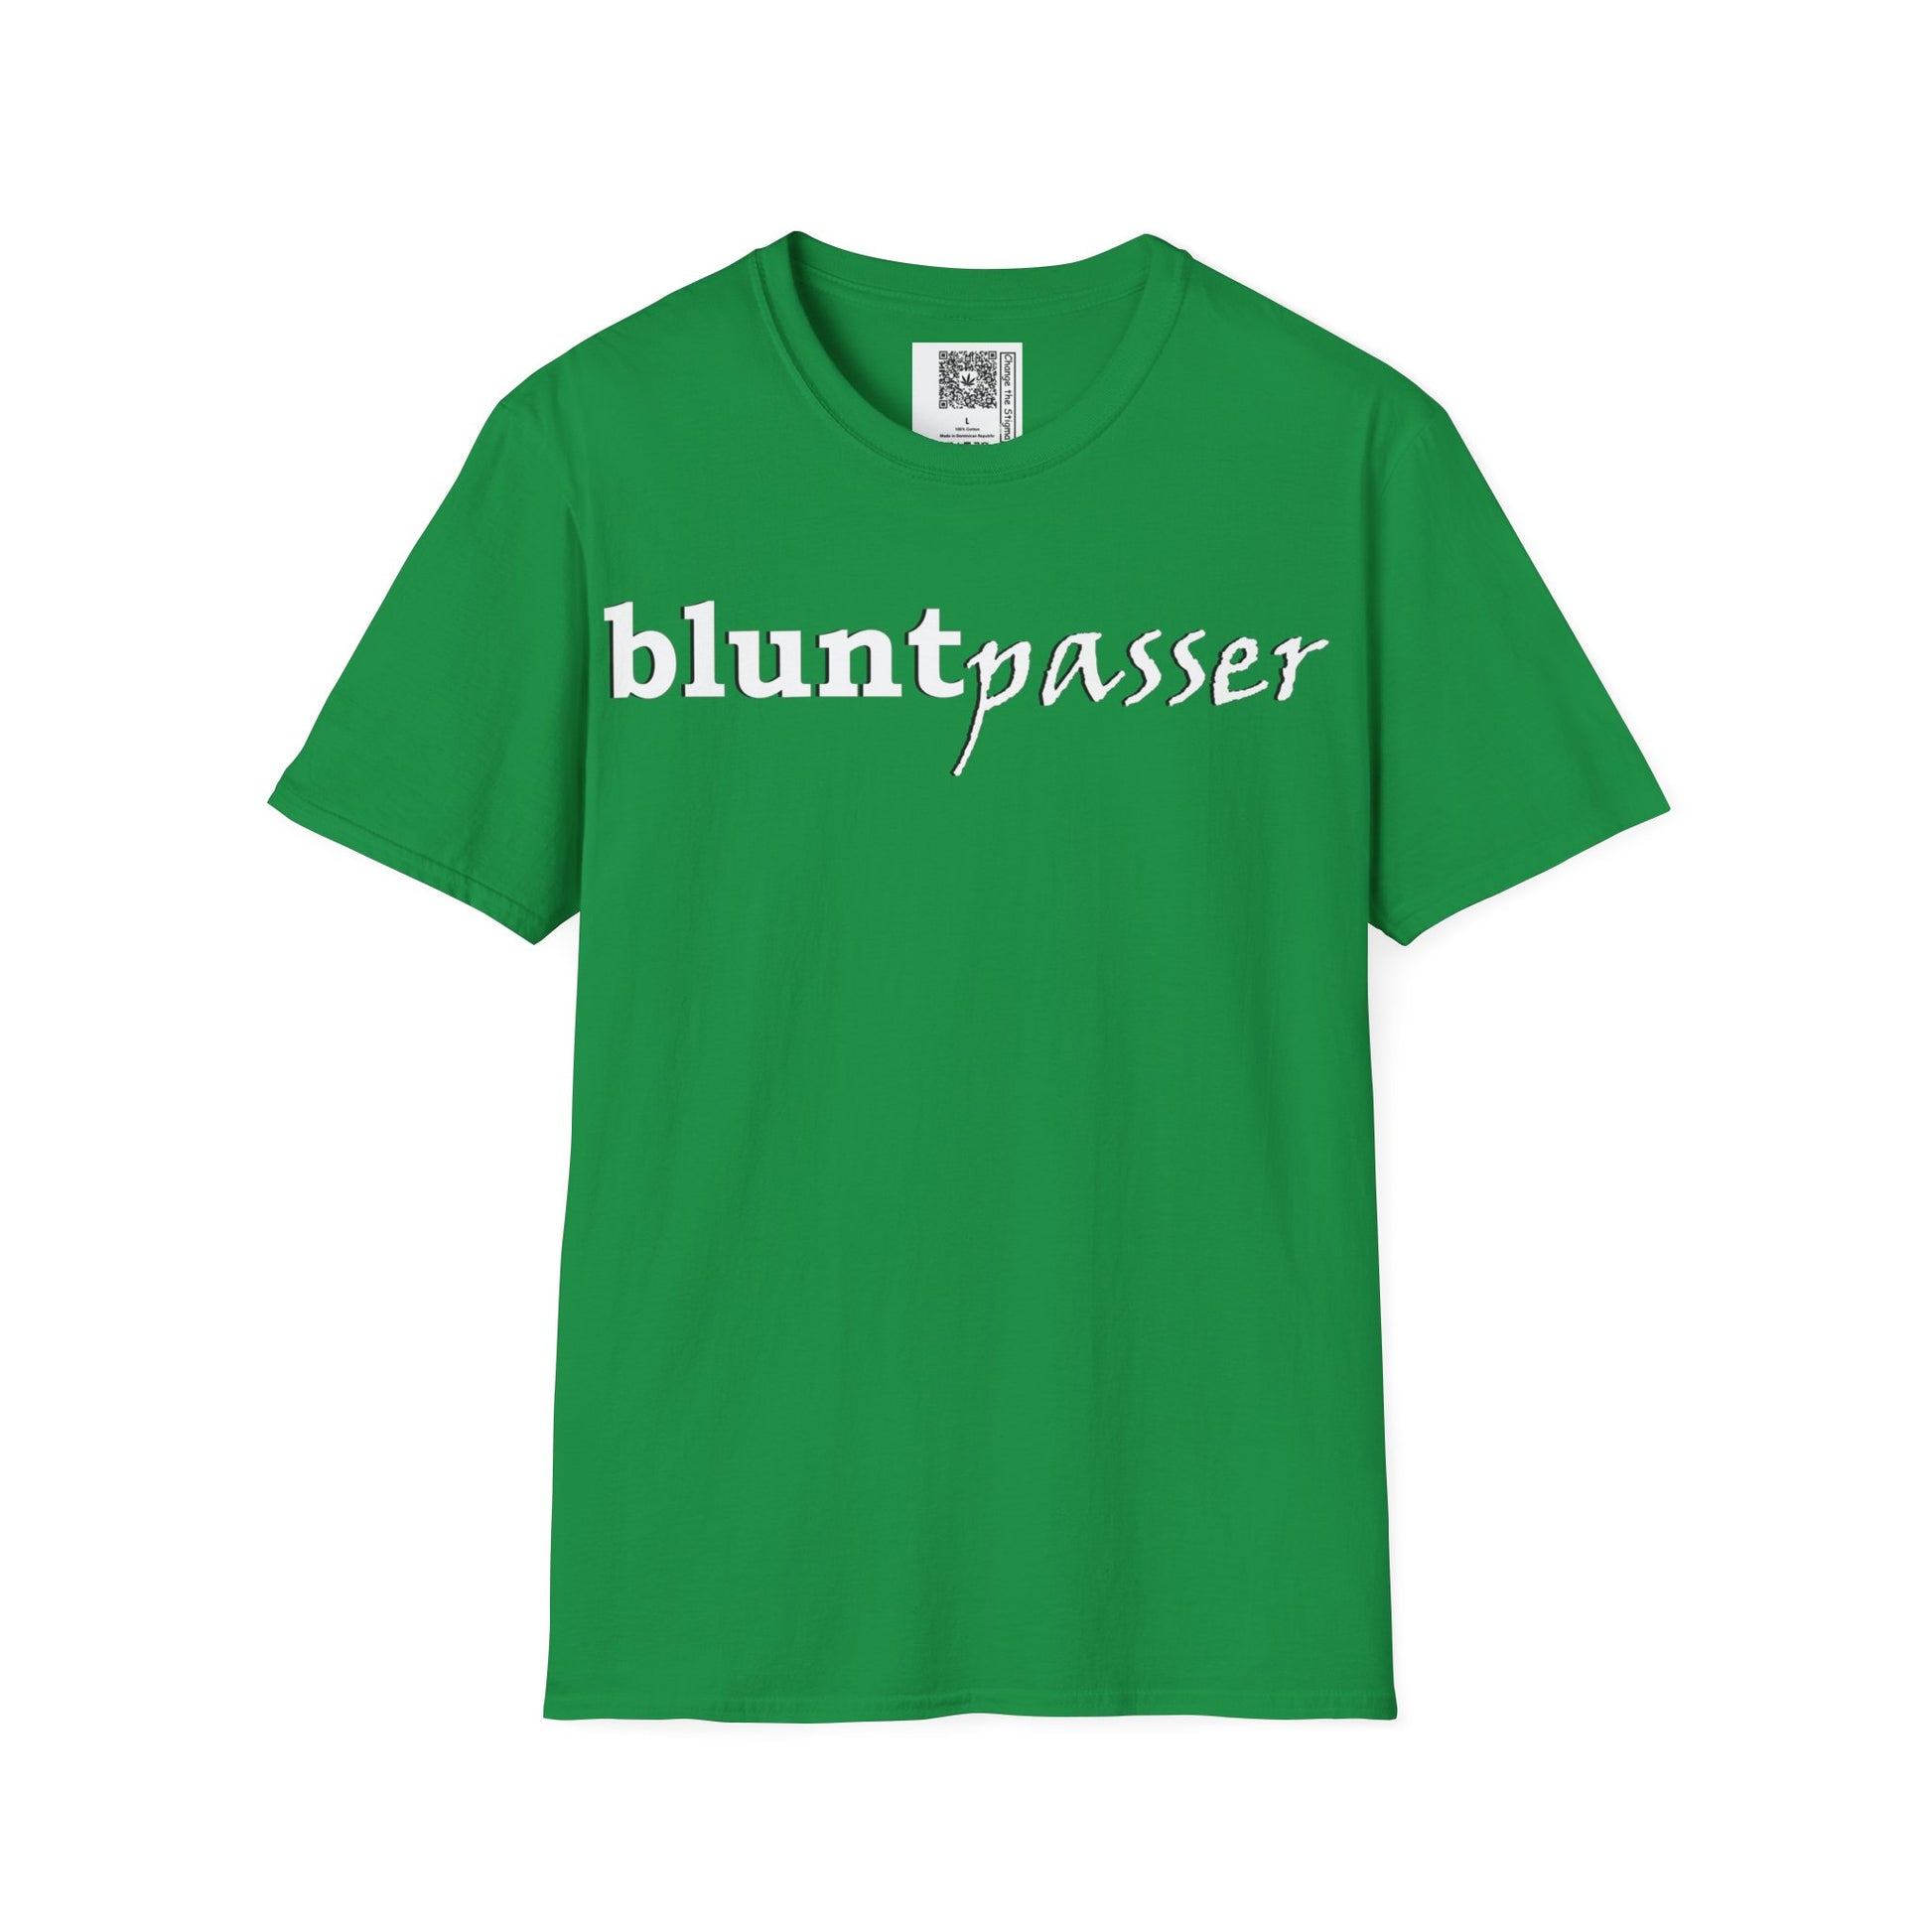 Change the Stigma, Irish green color, shirt saying "blunt passer", Shirt is open displayed, Qr code is shown neck tag